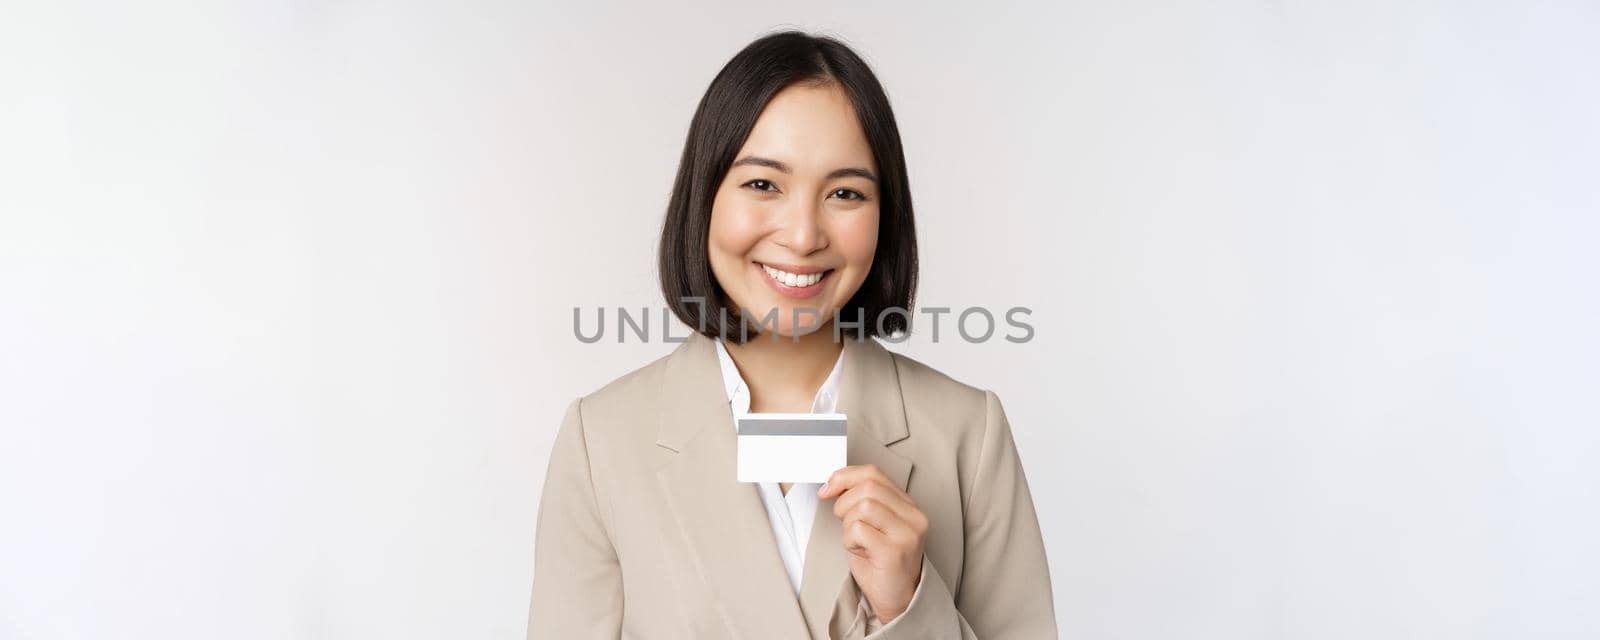 Smiling office clerk, asian corporate woman showing credit card, standing over white background in beige suit. Copy space